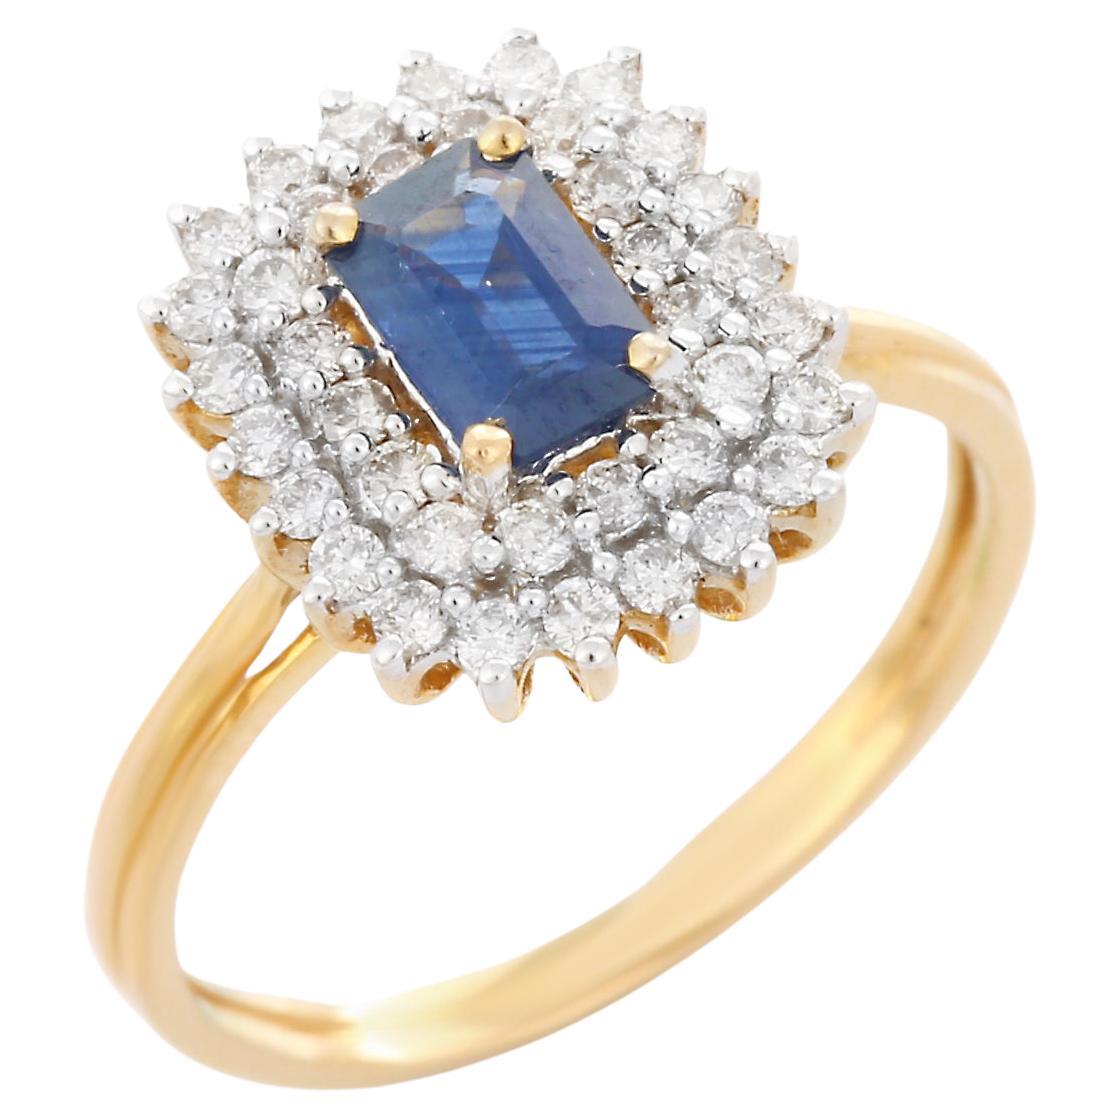 For Sale:  Regal Blue Sapphire Diamond Halo Wedding Ring in 18K Solid Yellow Gold